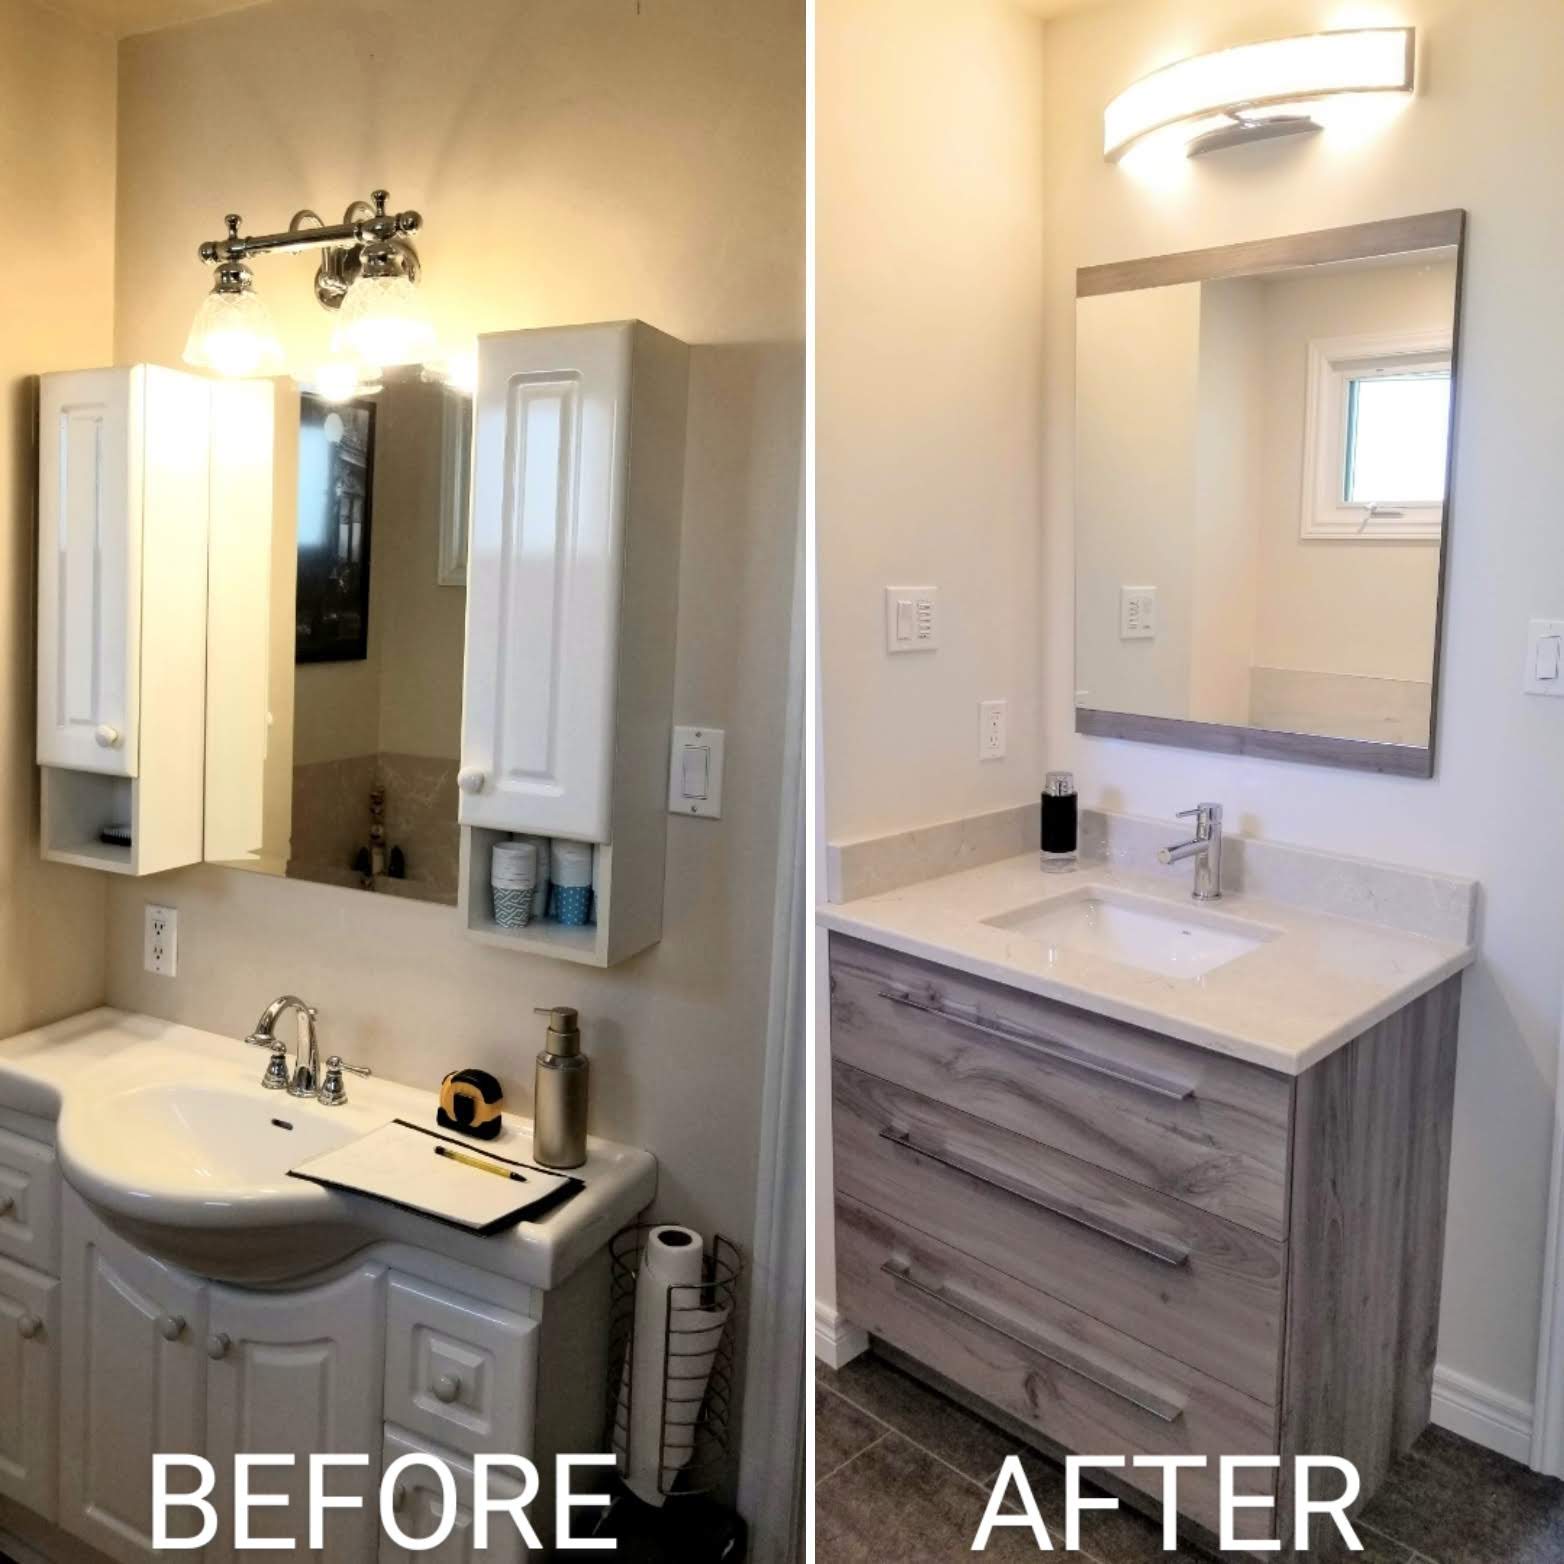 Before and after bathroom vanity